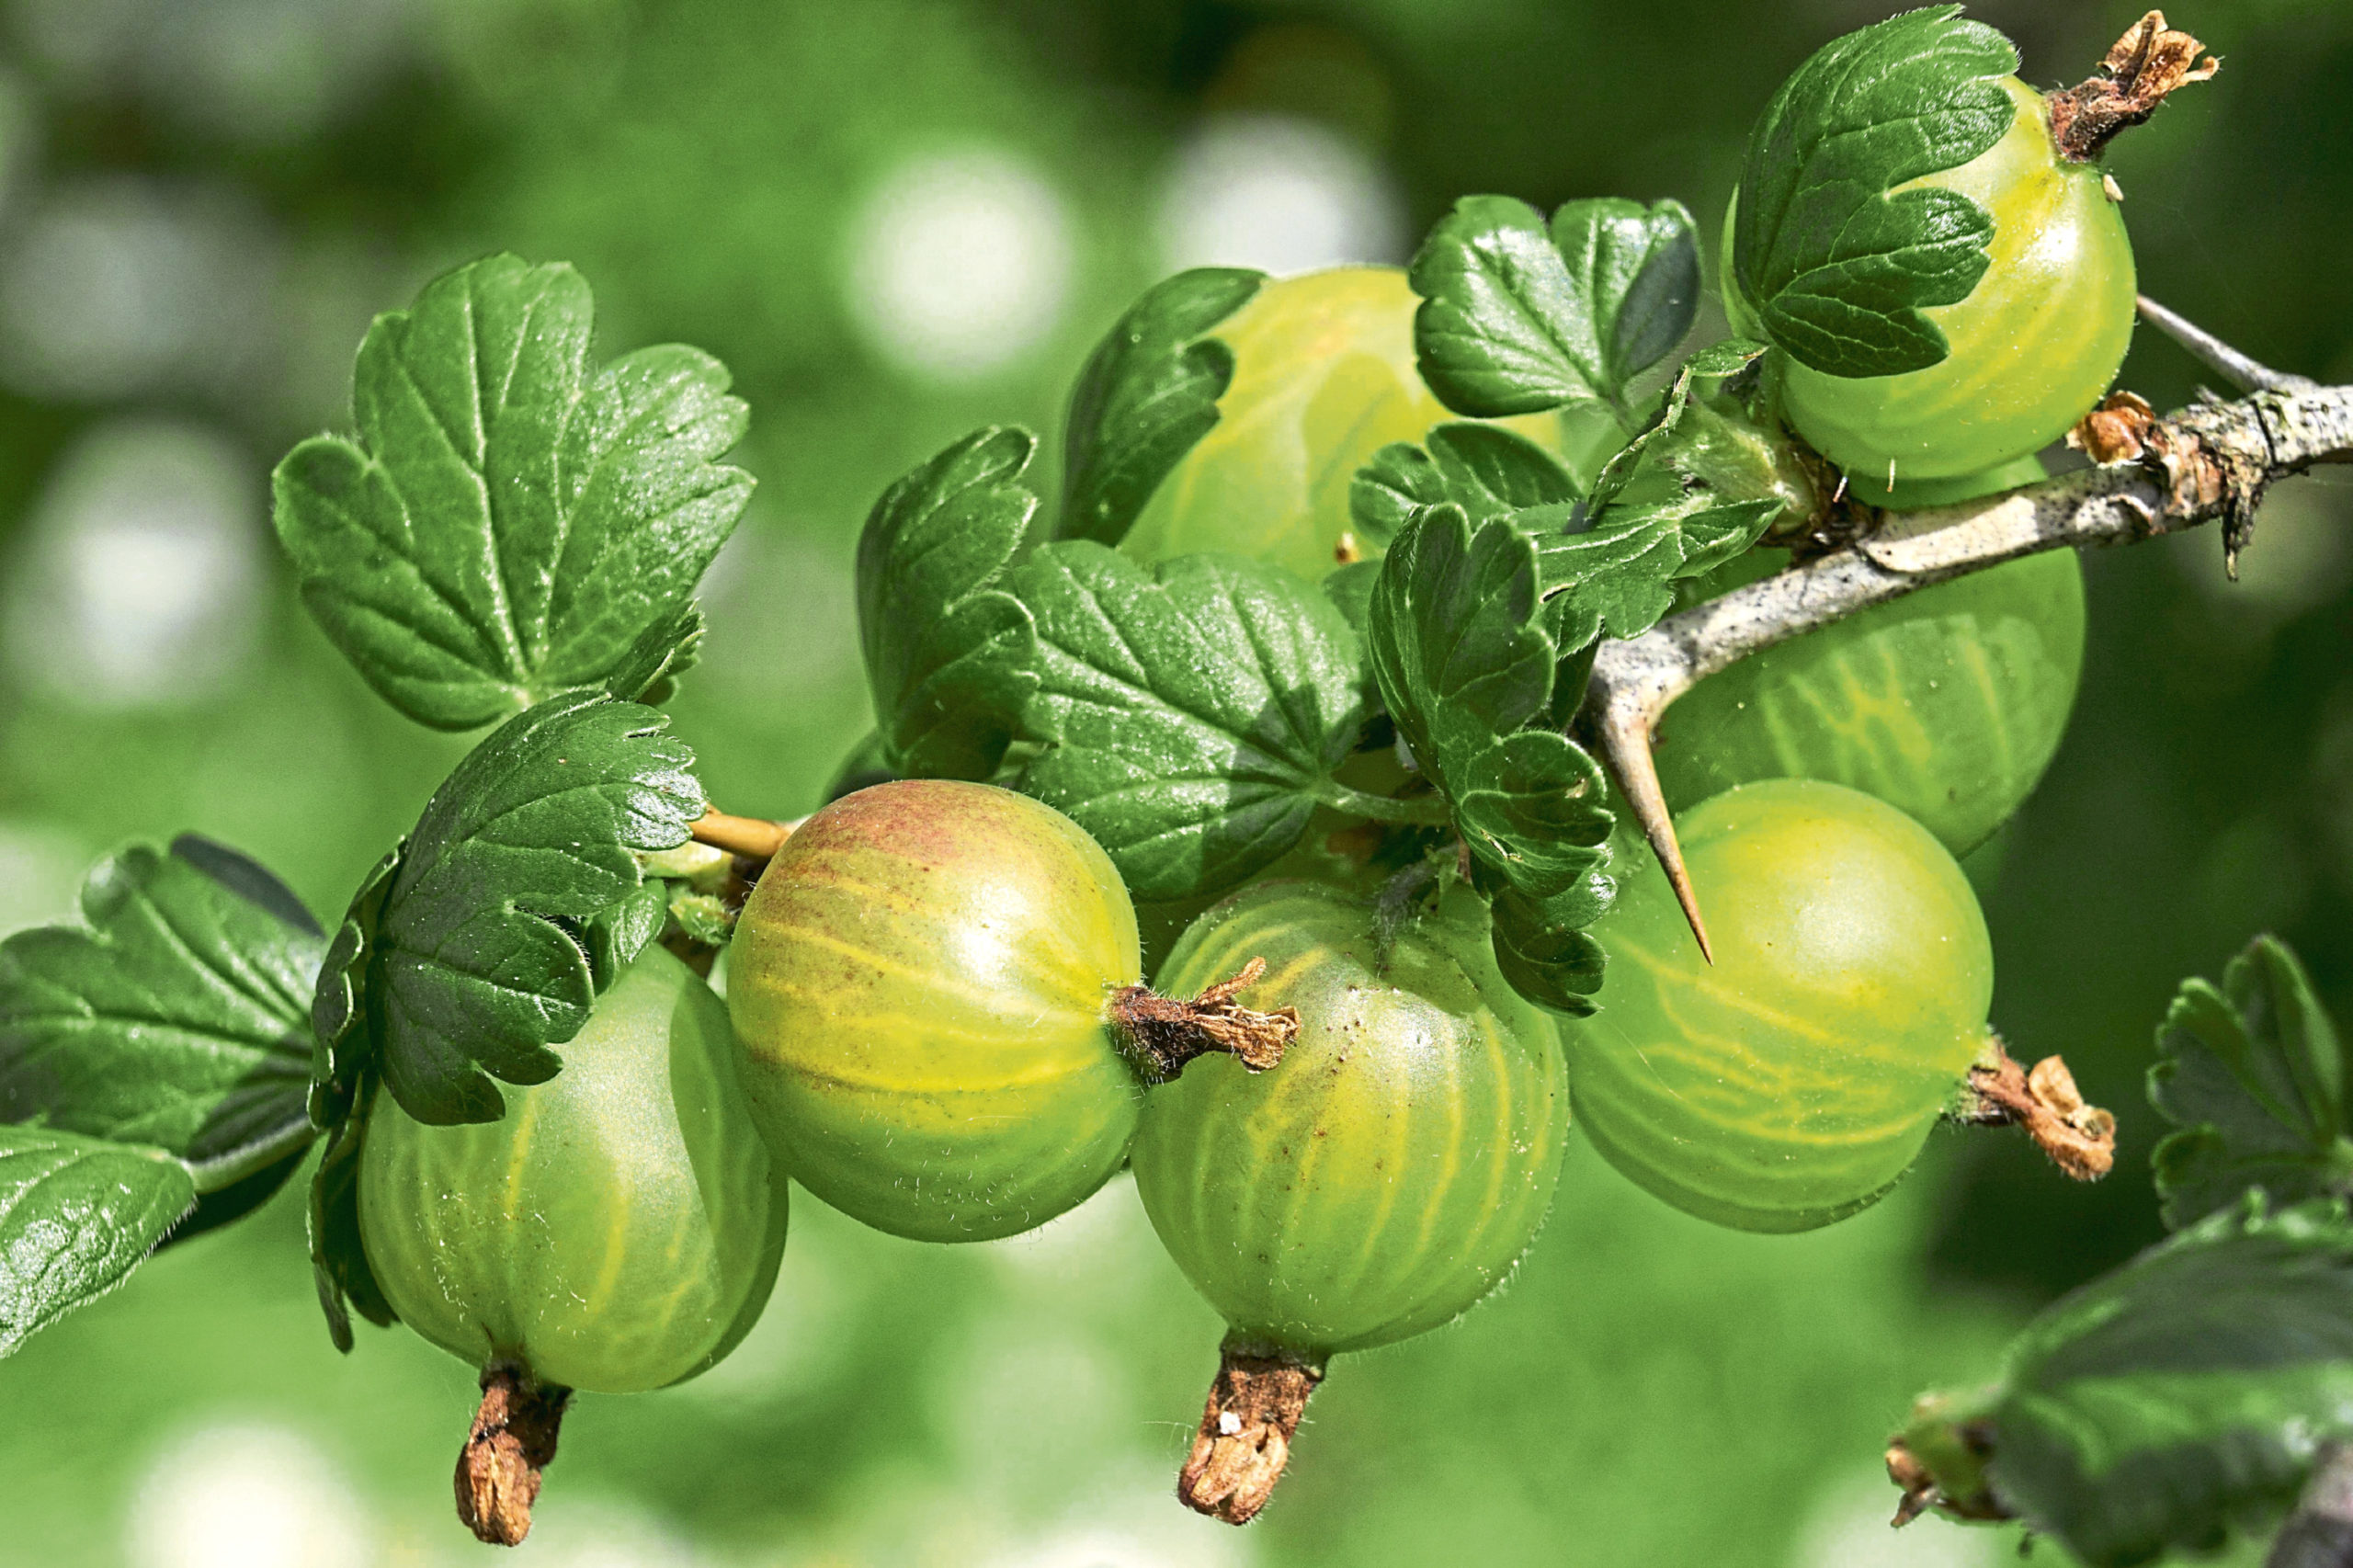 Gooseberries are just about ready to harvest